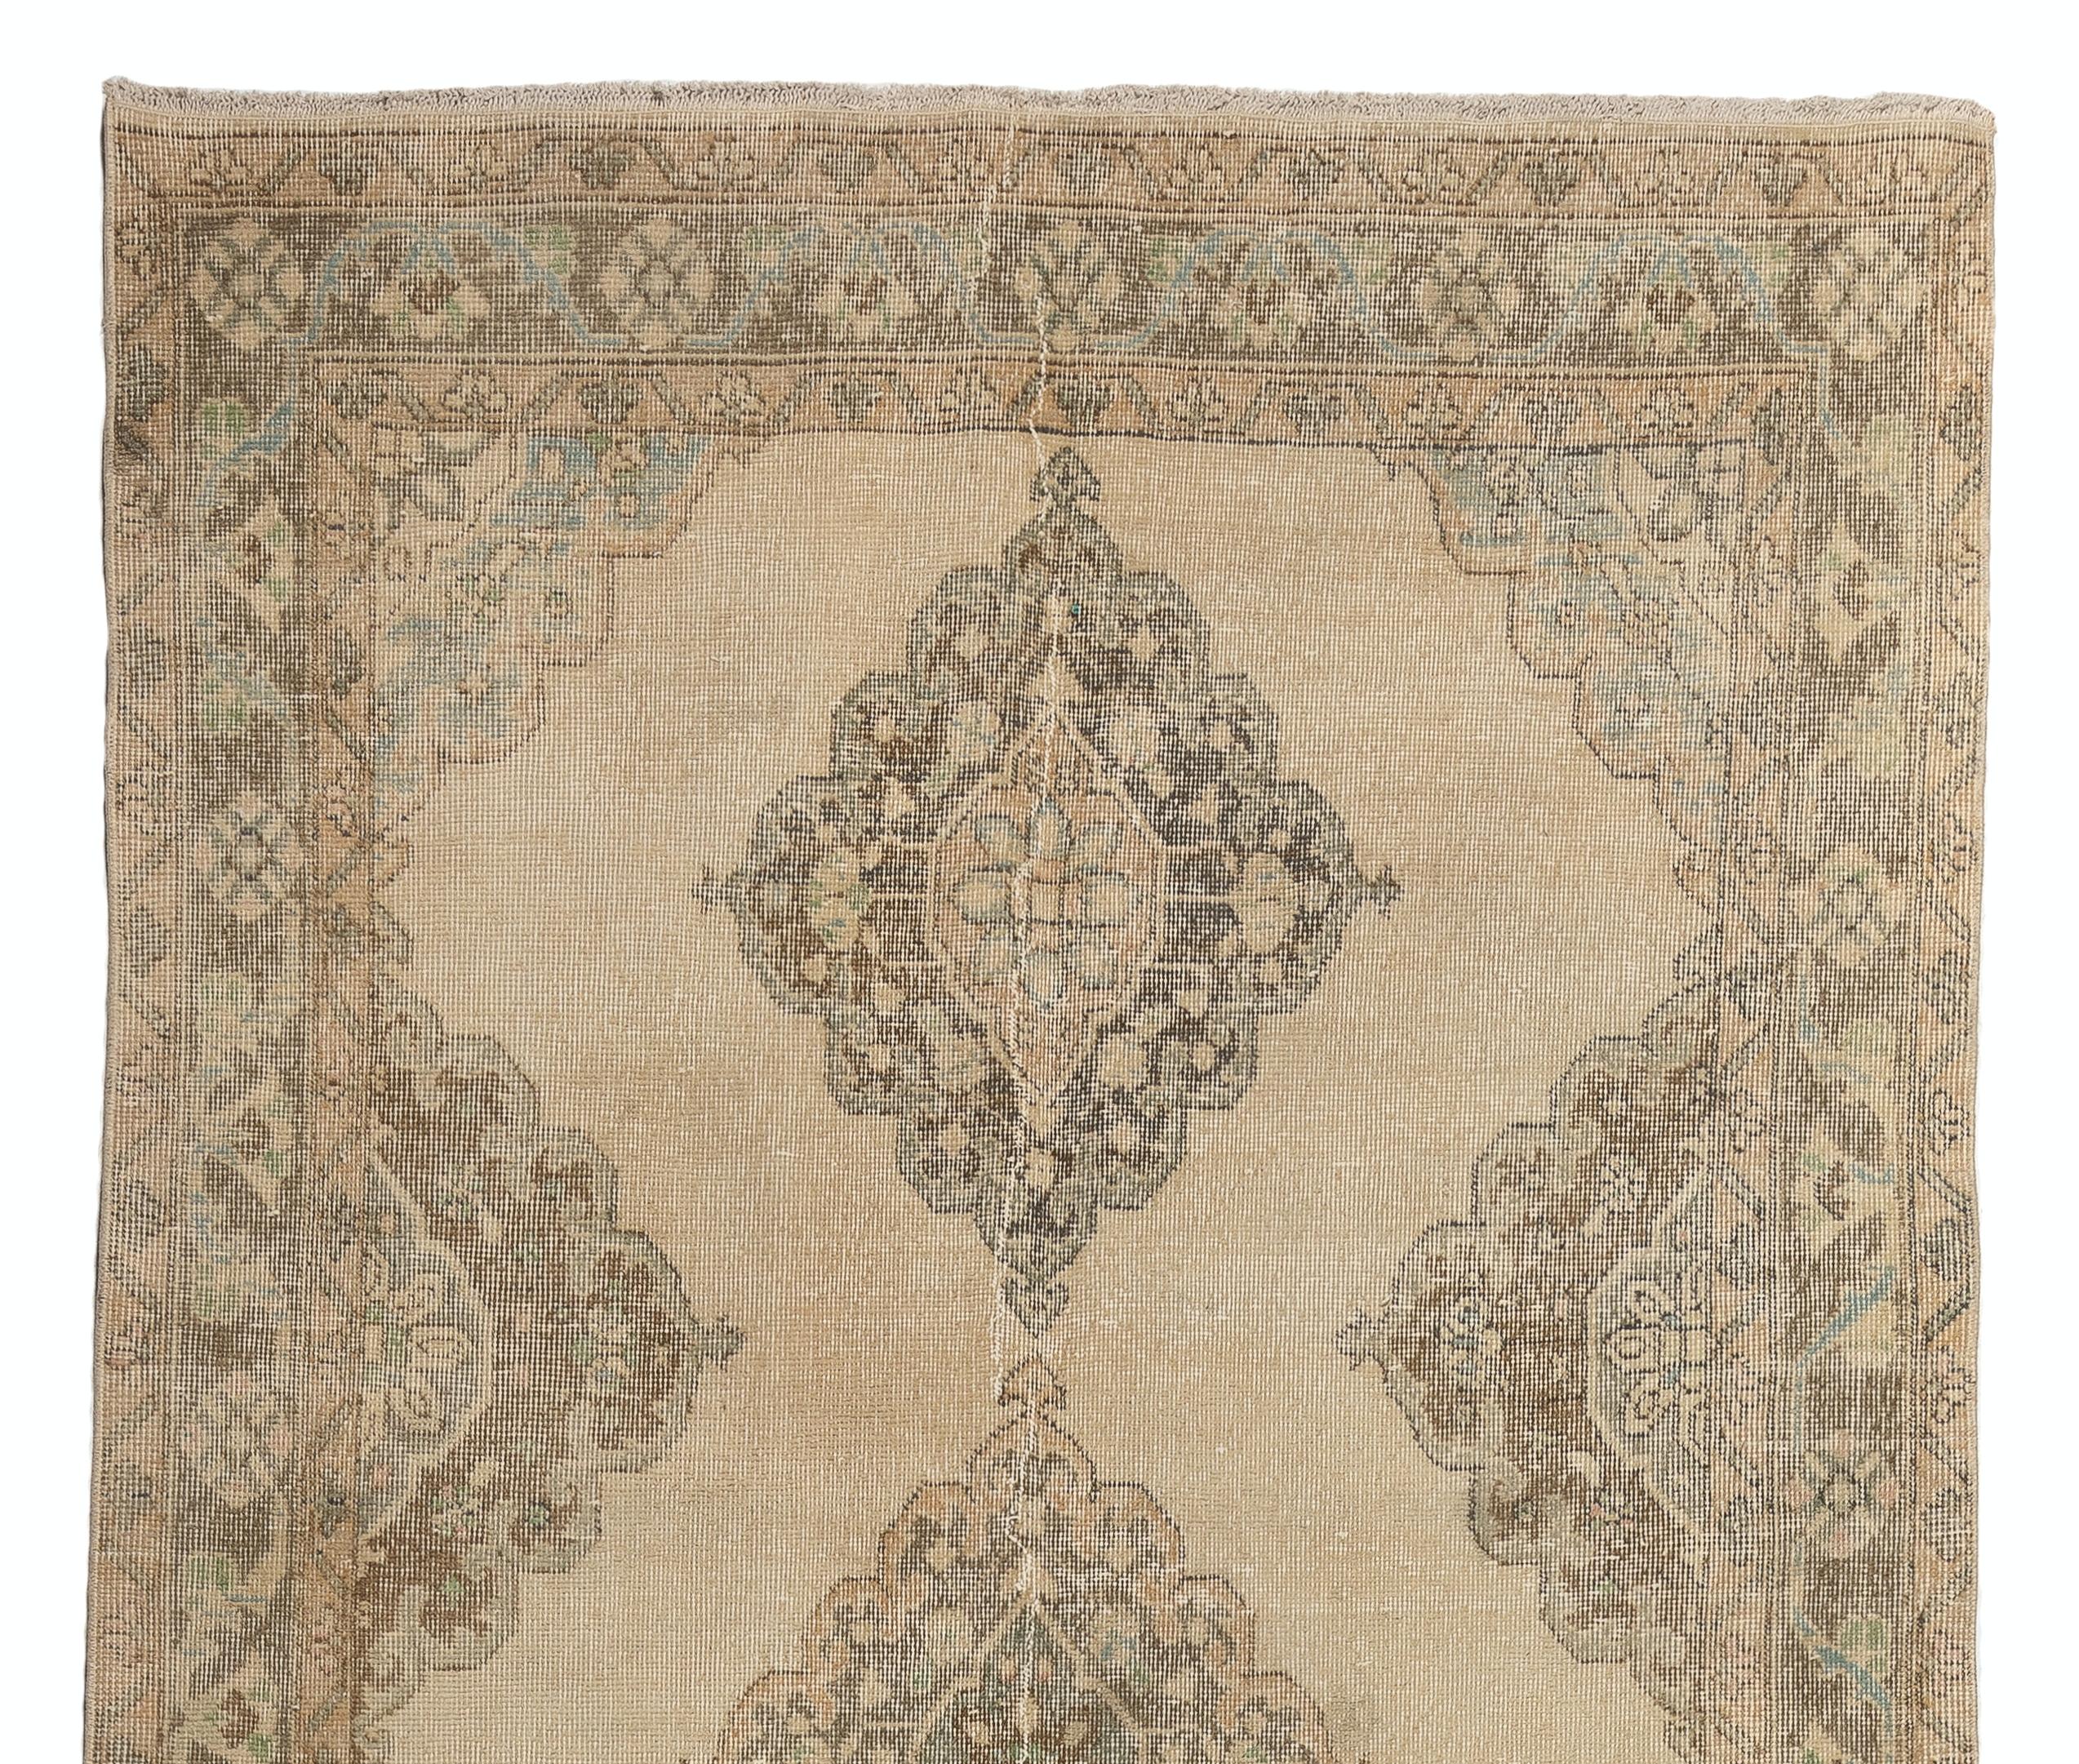 A vintage Turkish runner rug featuring a design of multiple linked curvilinear medallions against a sand beige background in brown, fawn and aqua green colors. 
The rug was hand-knotted in the 1960s and has low wool pile on cotton foundation. It is